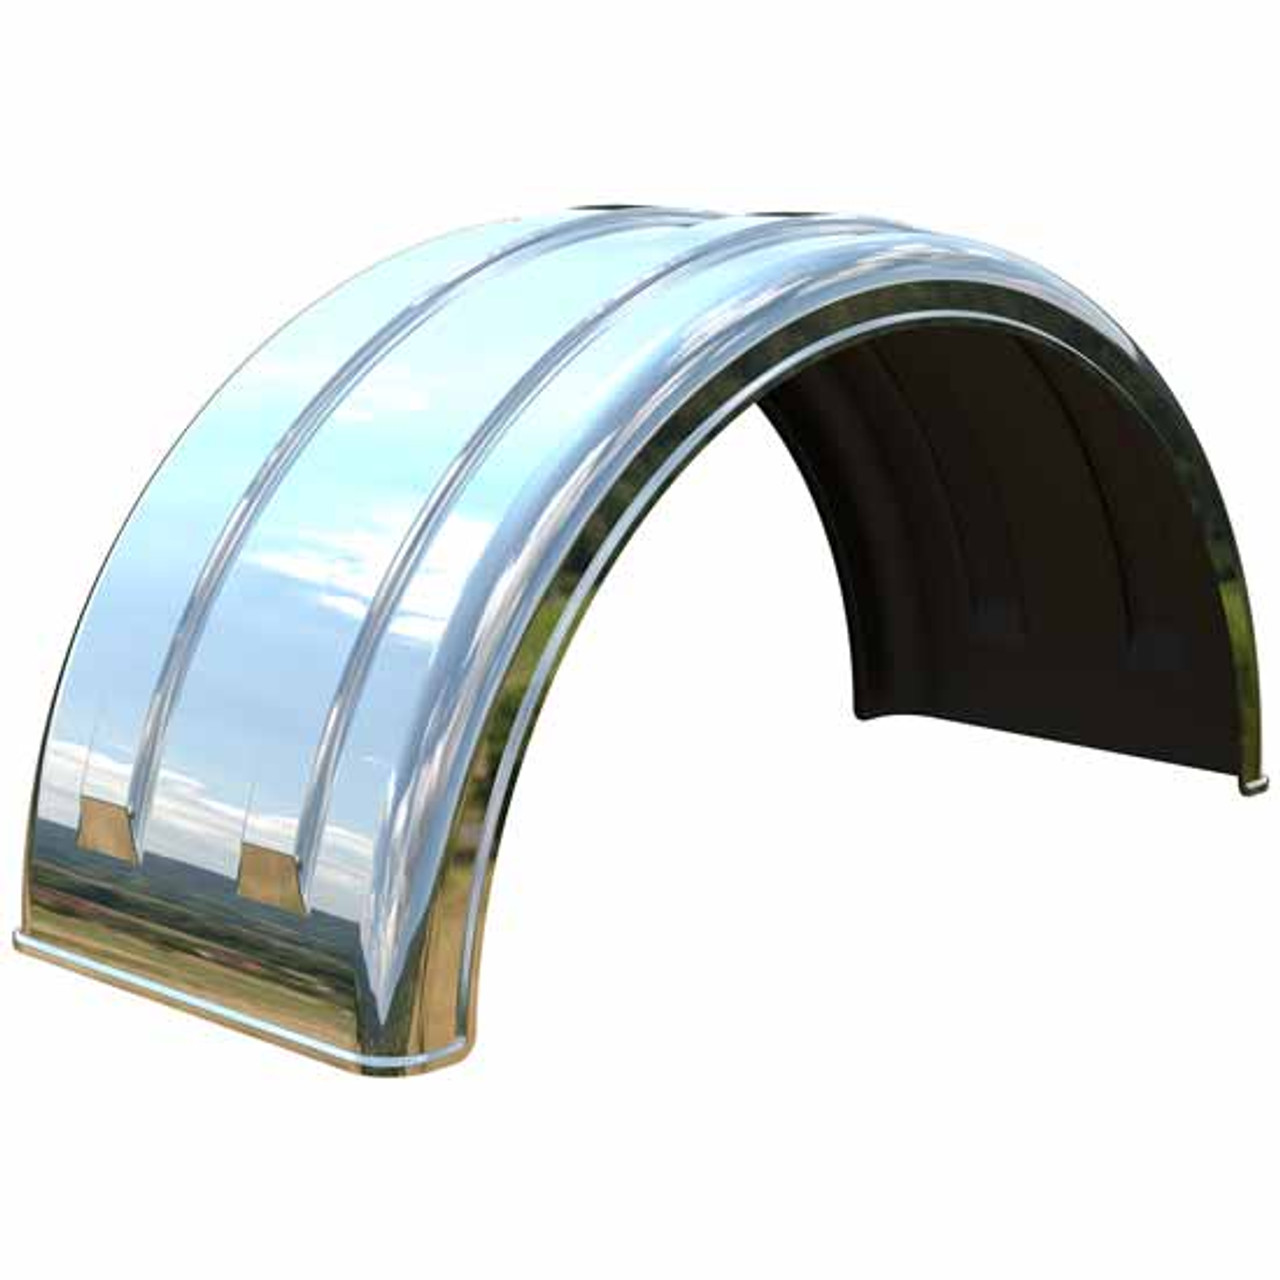 Minimizer Poly Fenders - Silver Mirror Finish For 22.25 Inch